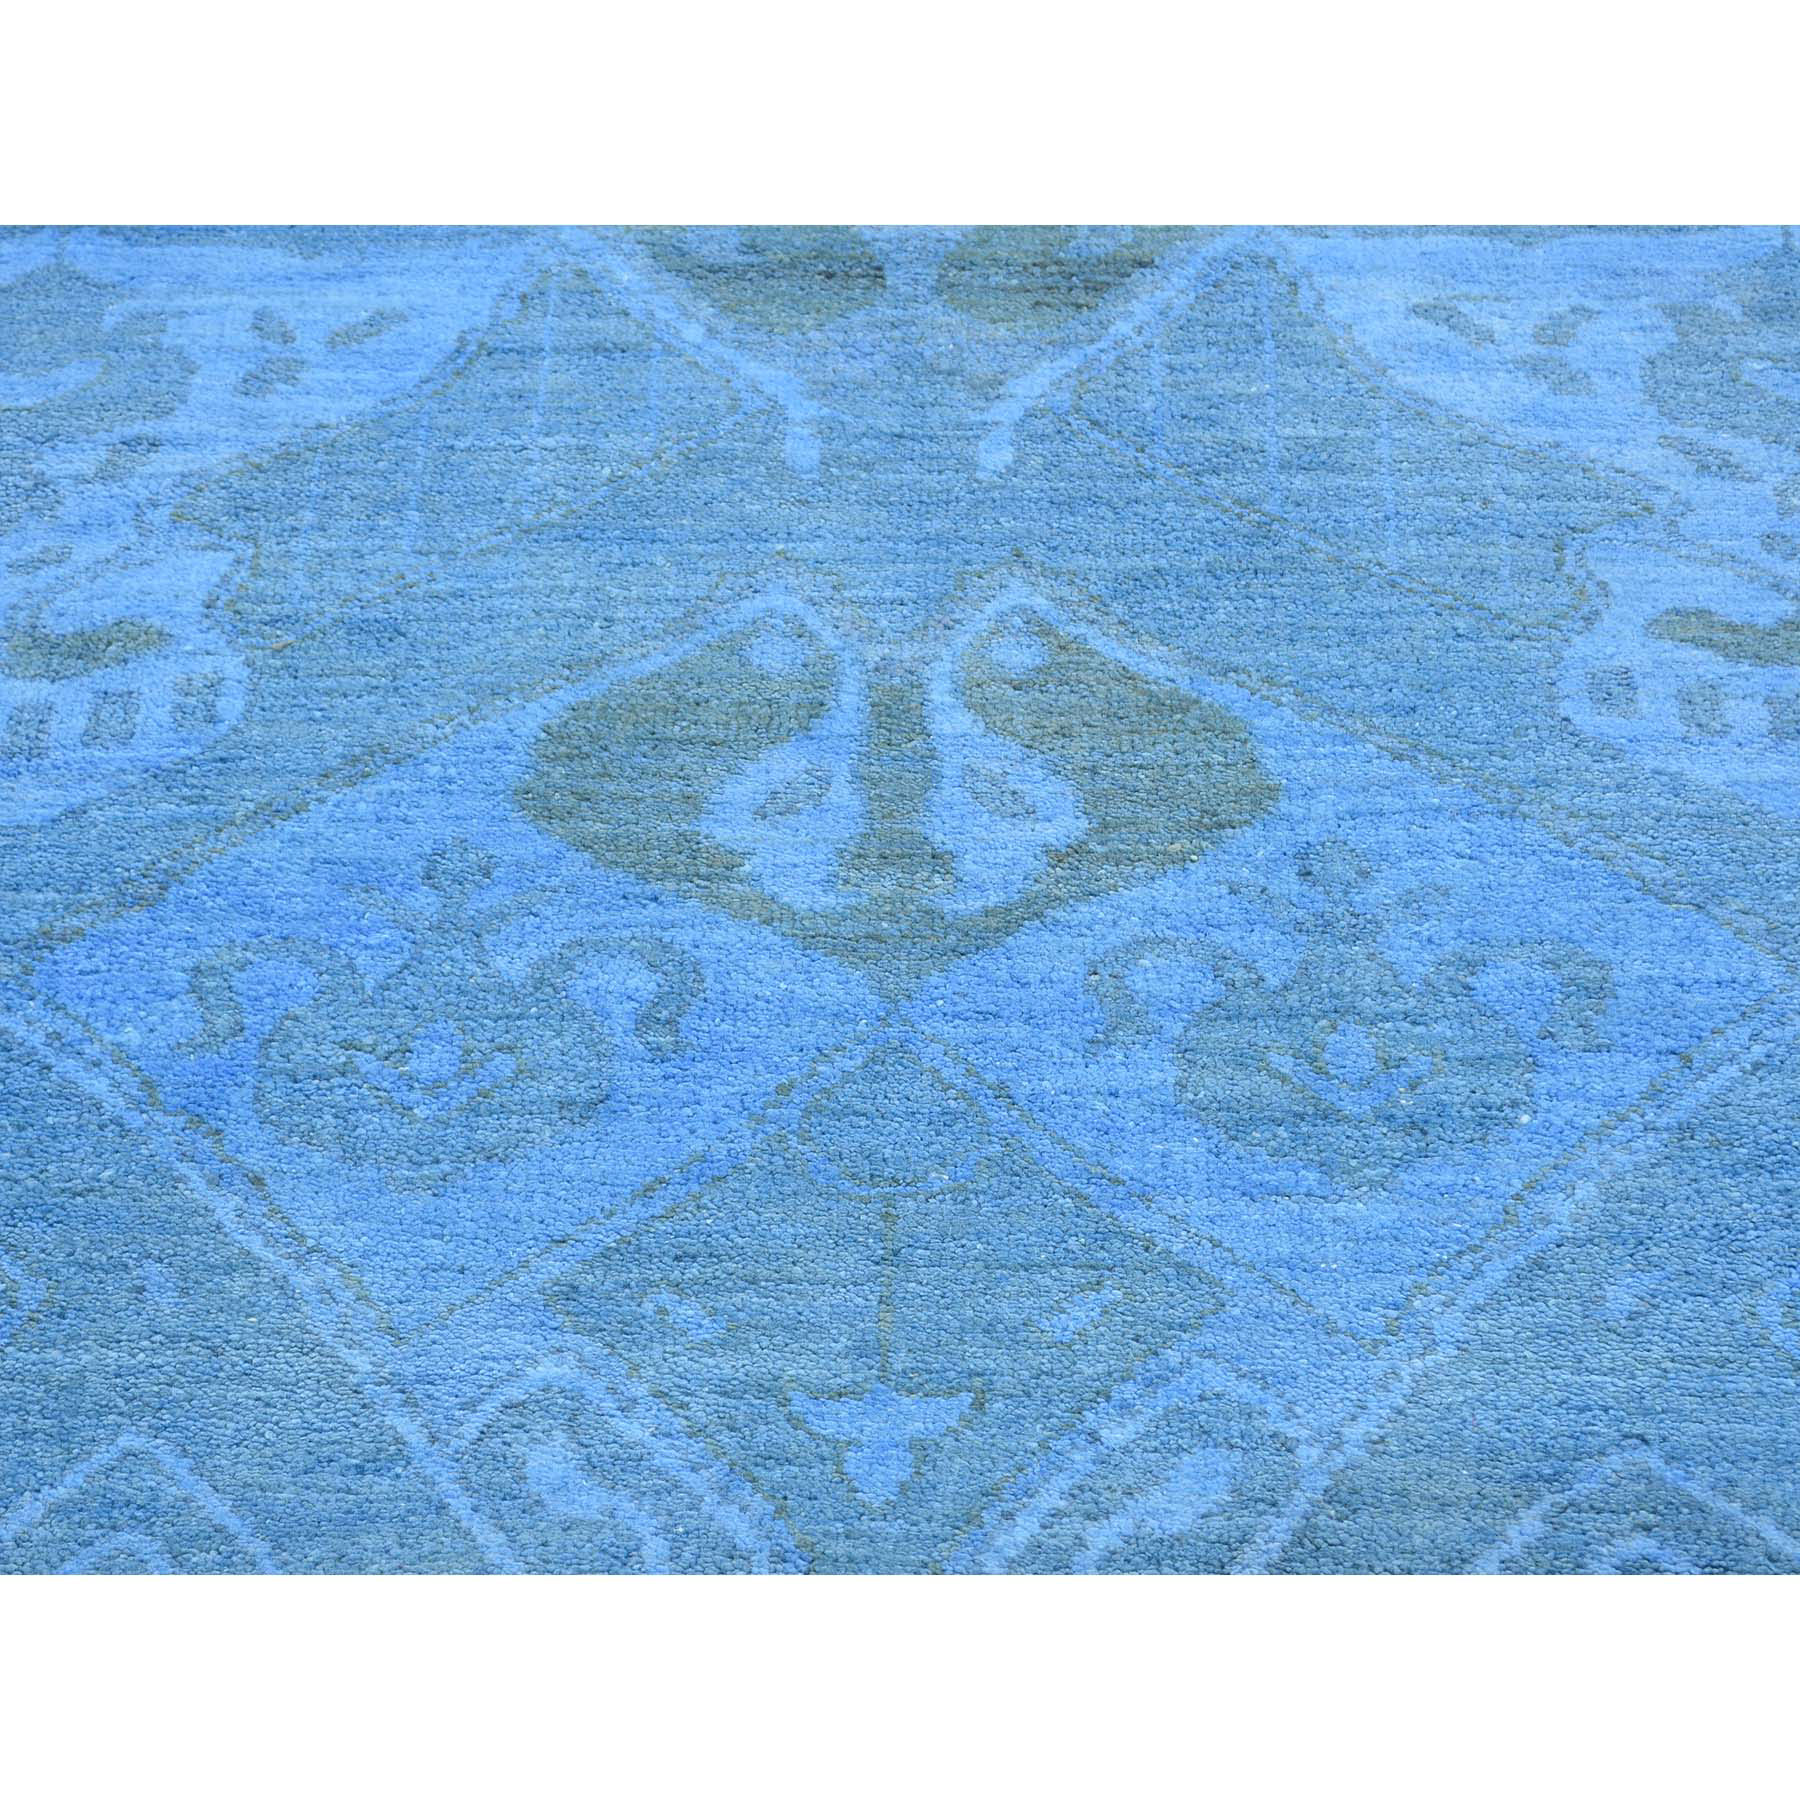 4-1 x5-7  Hand Knotted Sky Blue Cast Ikat Overdyed Pure Wool Oriental Rug 